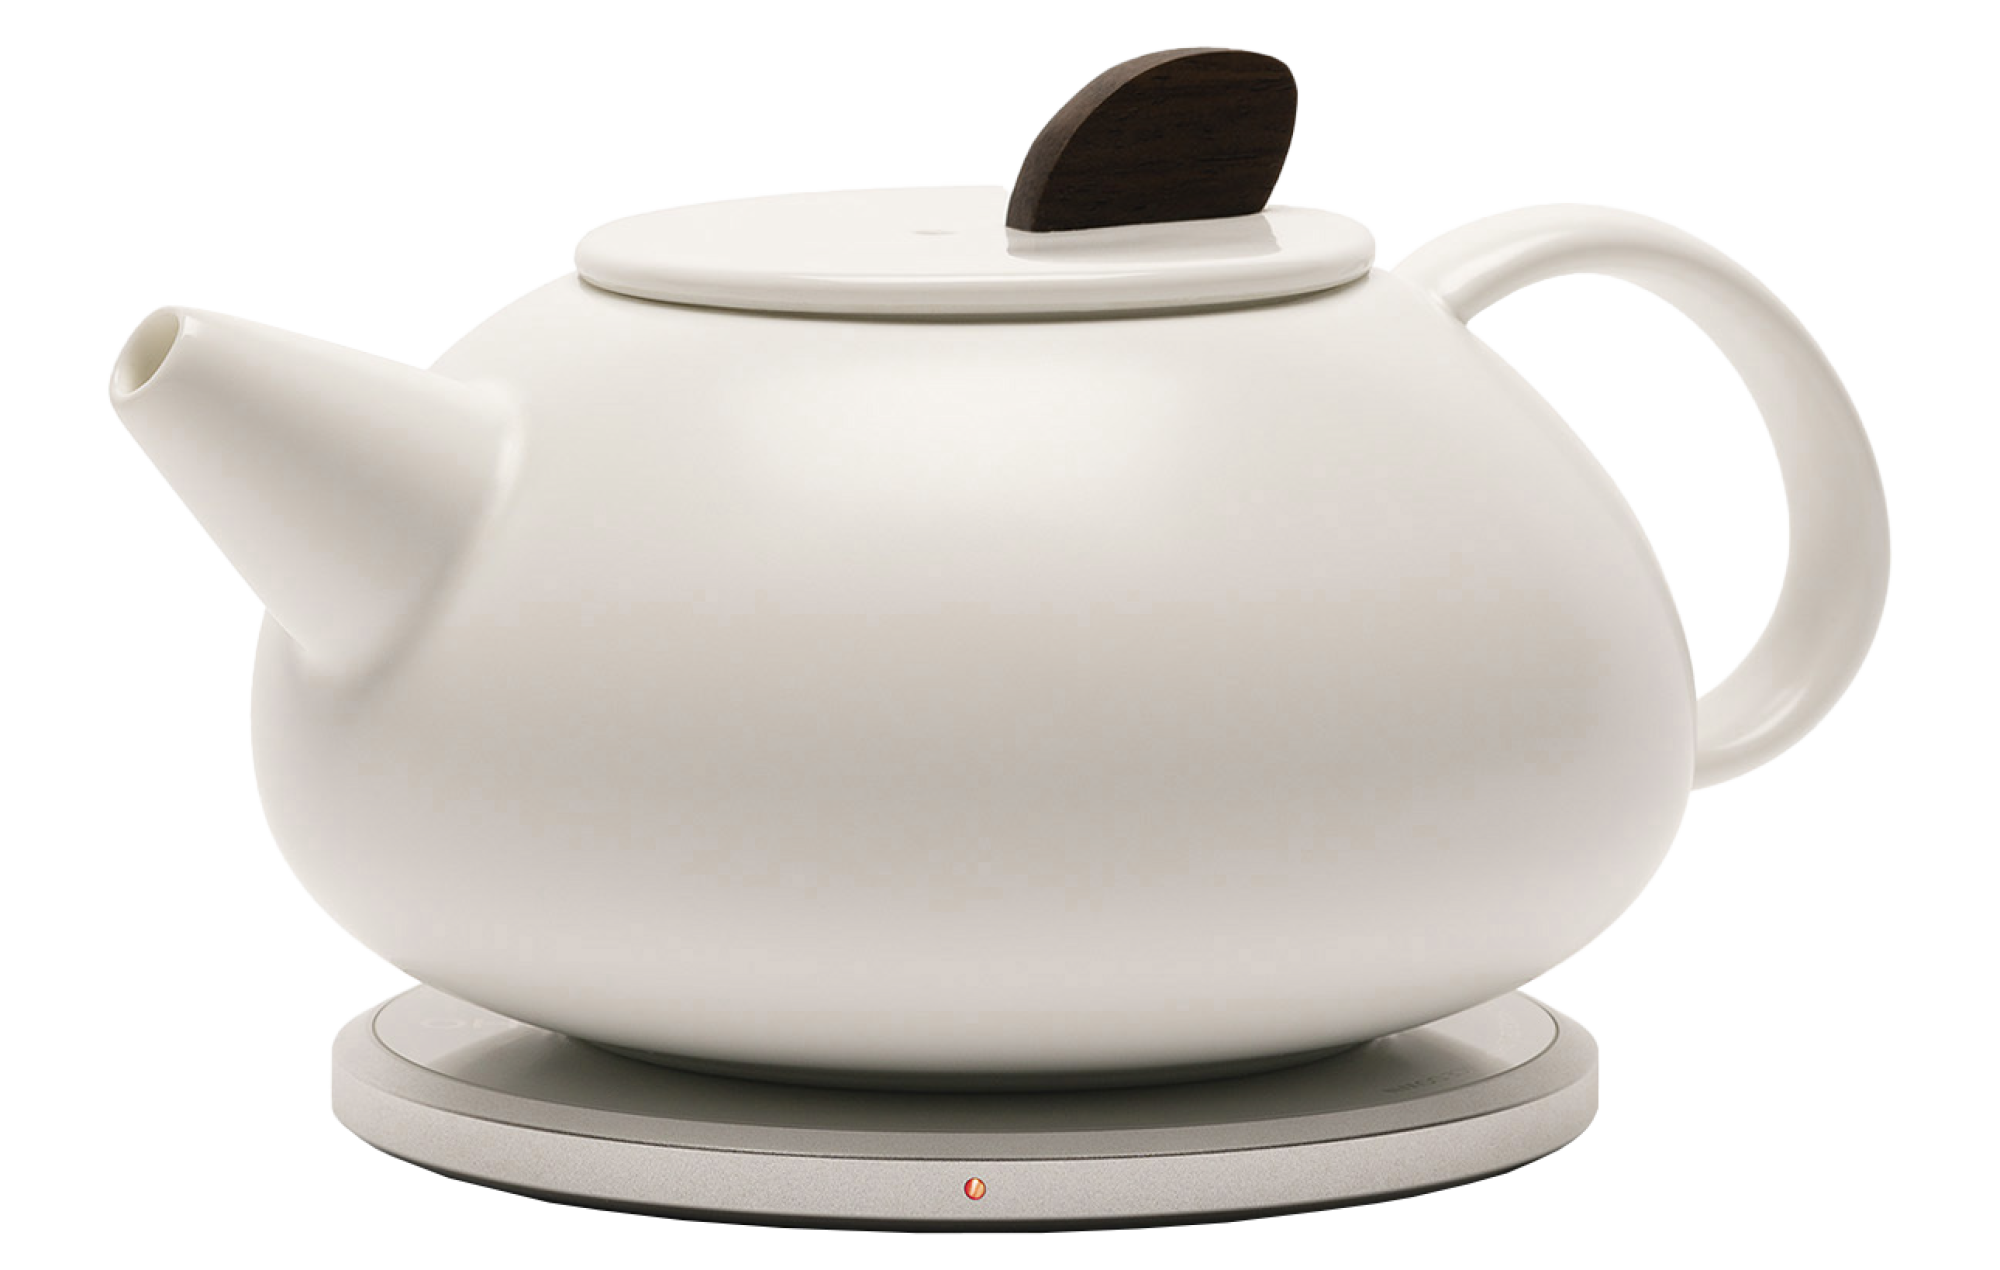 OHOM’s Leiph self-heating teapot set with ceramic vessel and pad